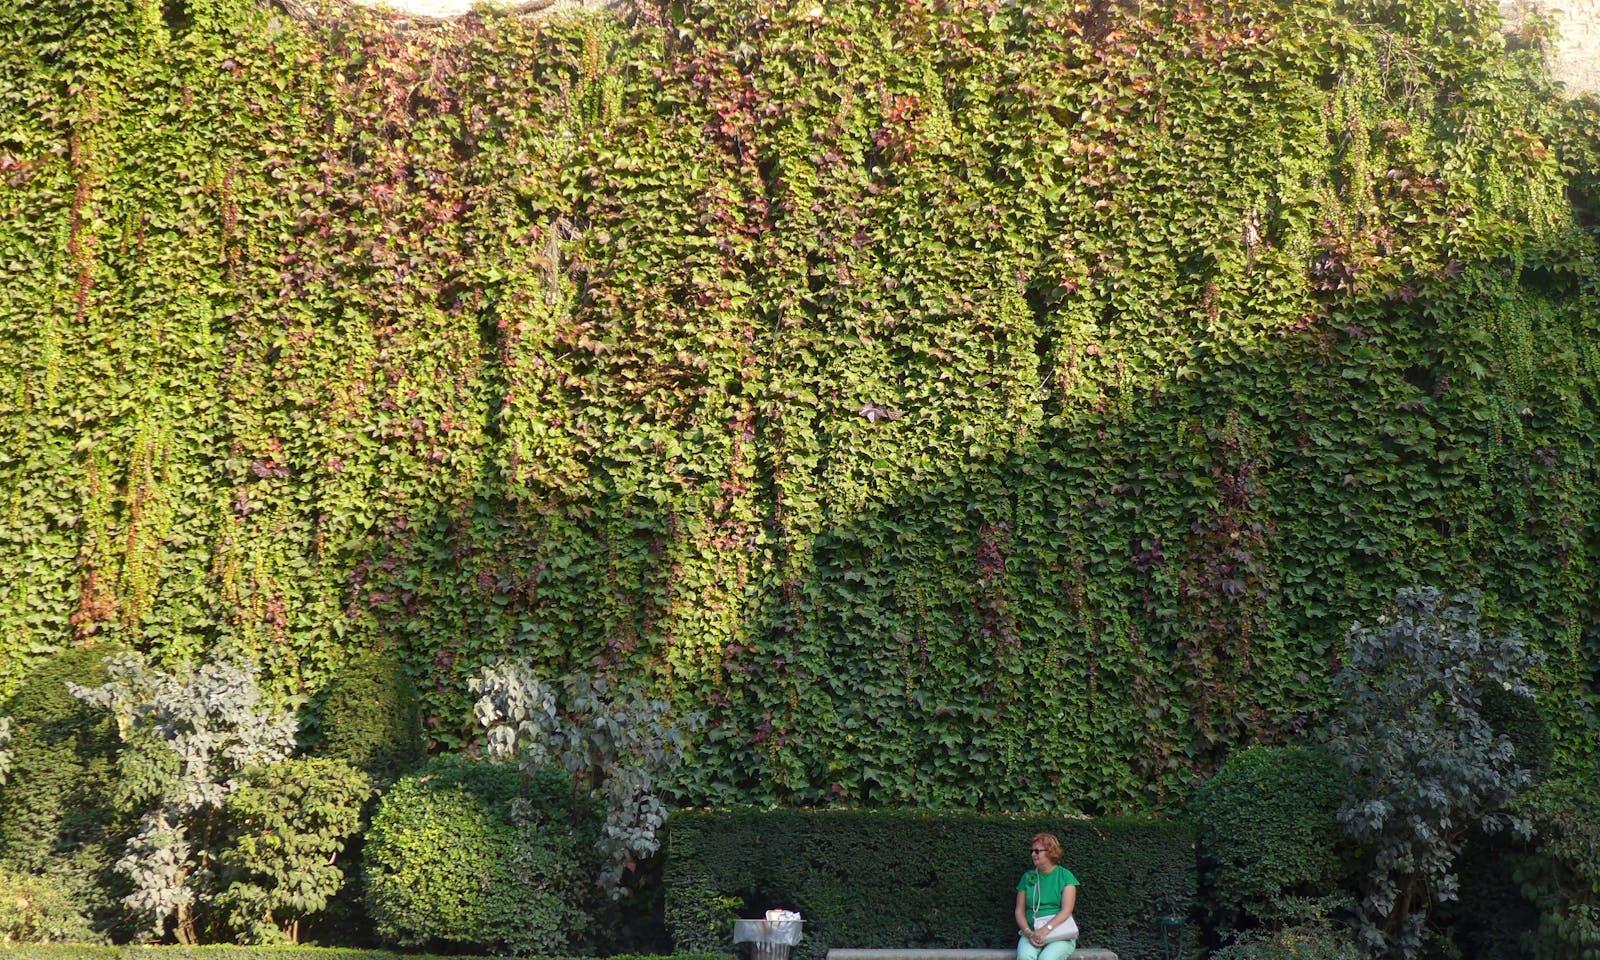 Woman sitting in front of a great green wall full of plants